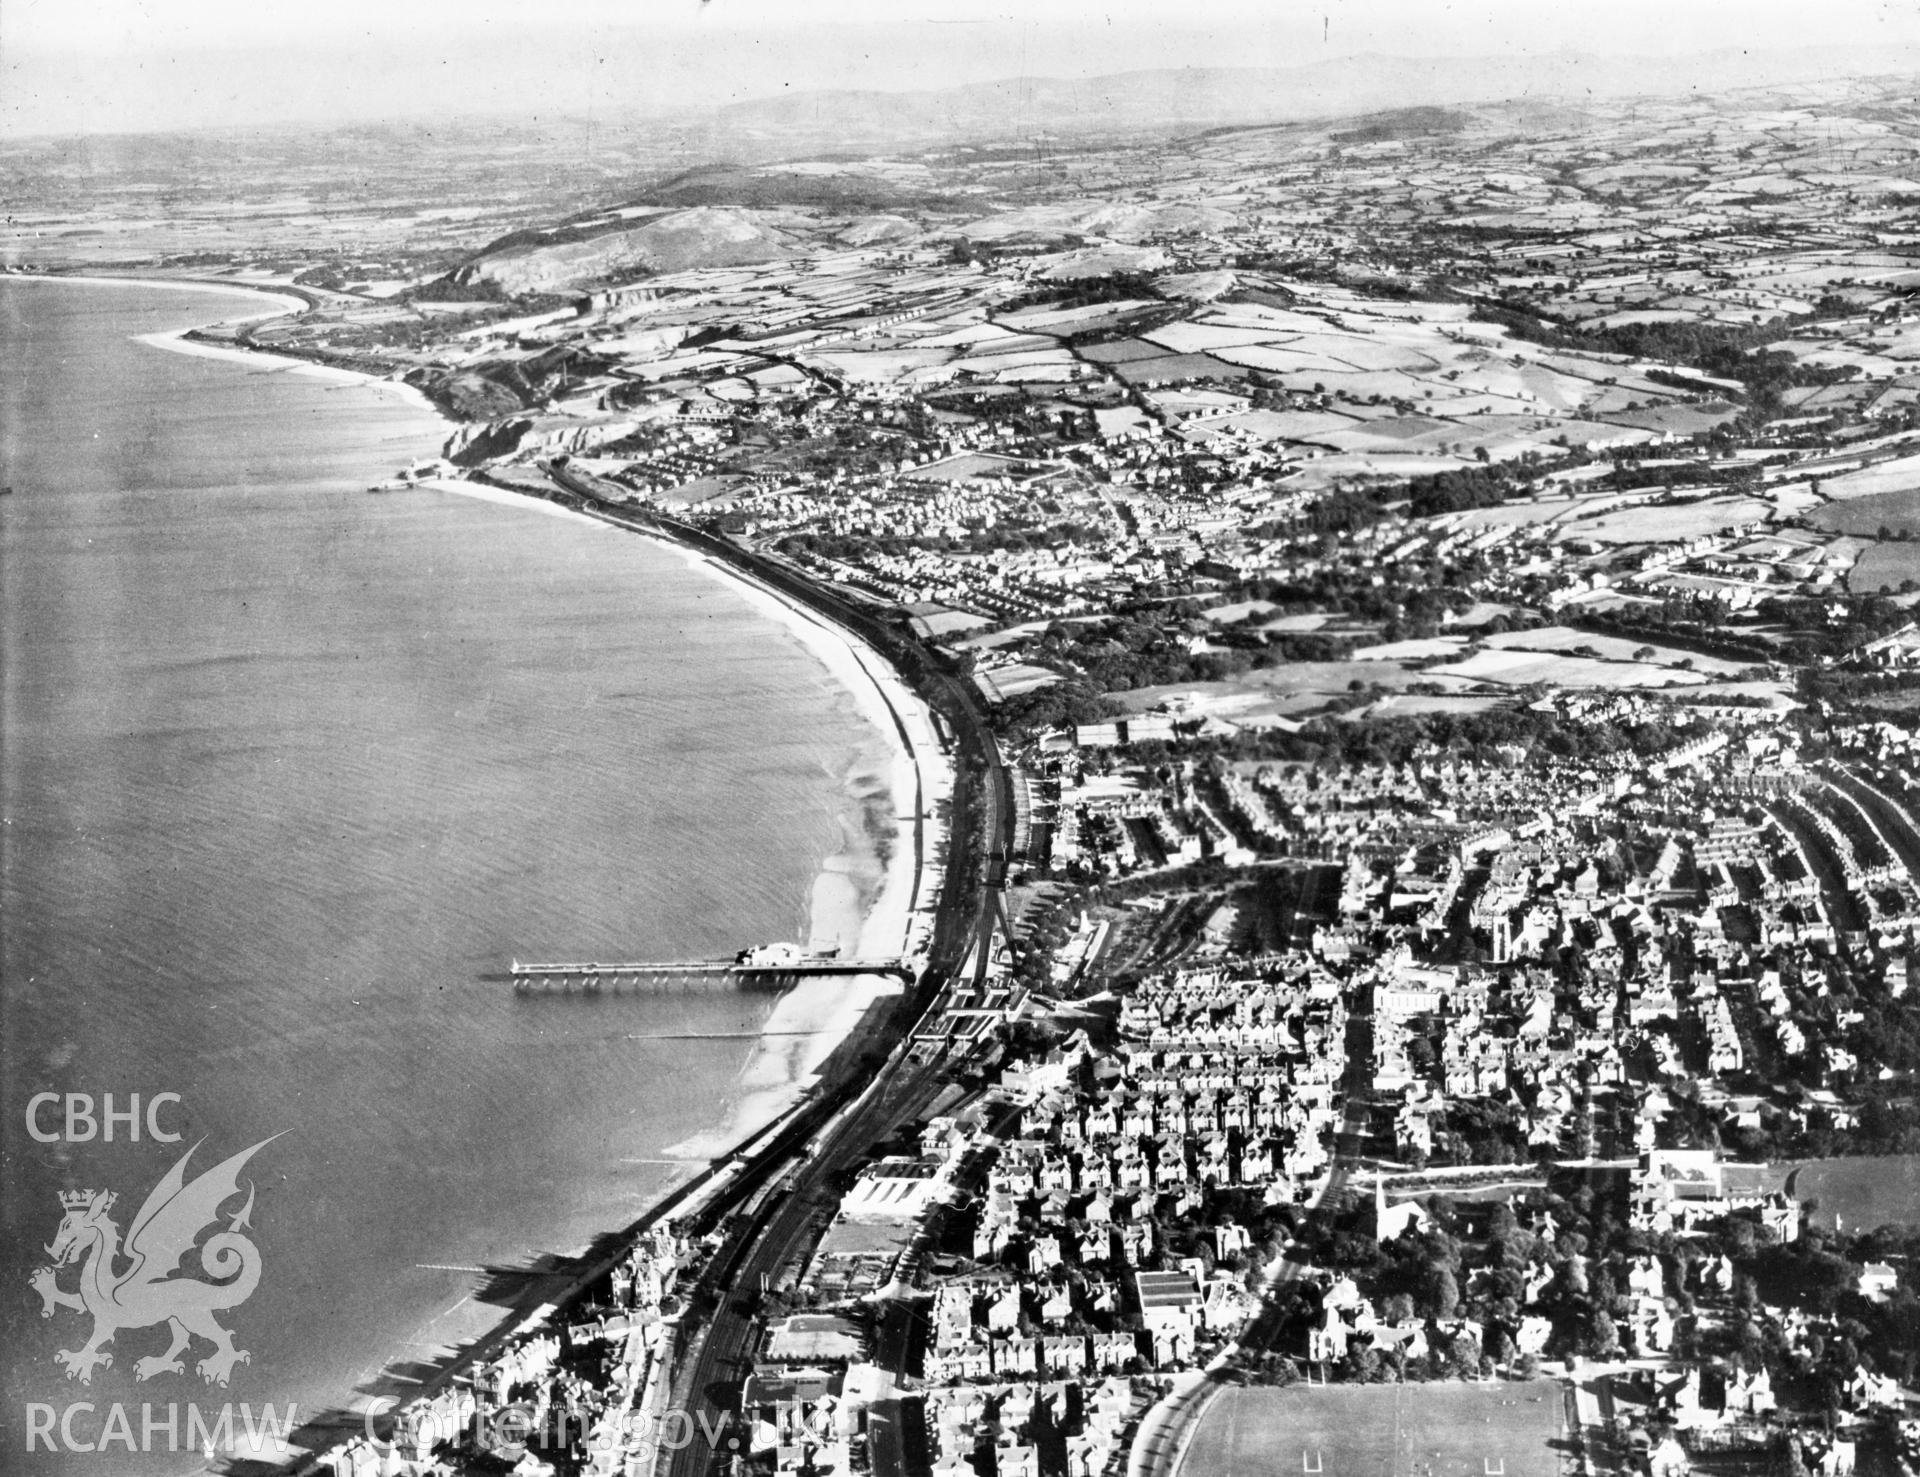 General view of Colwyn Bay. Oblique aerial photograph, 5?x4? BW glass plate.